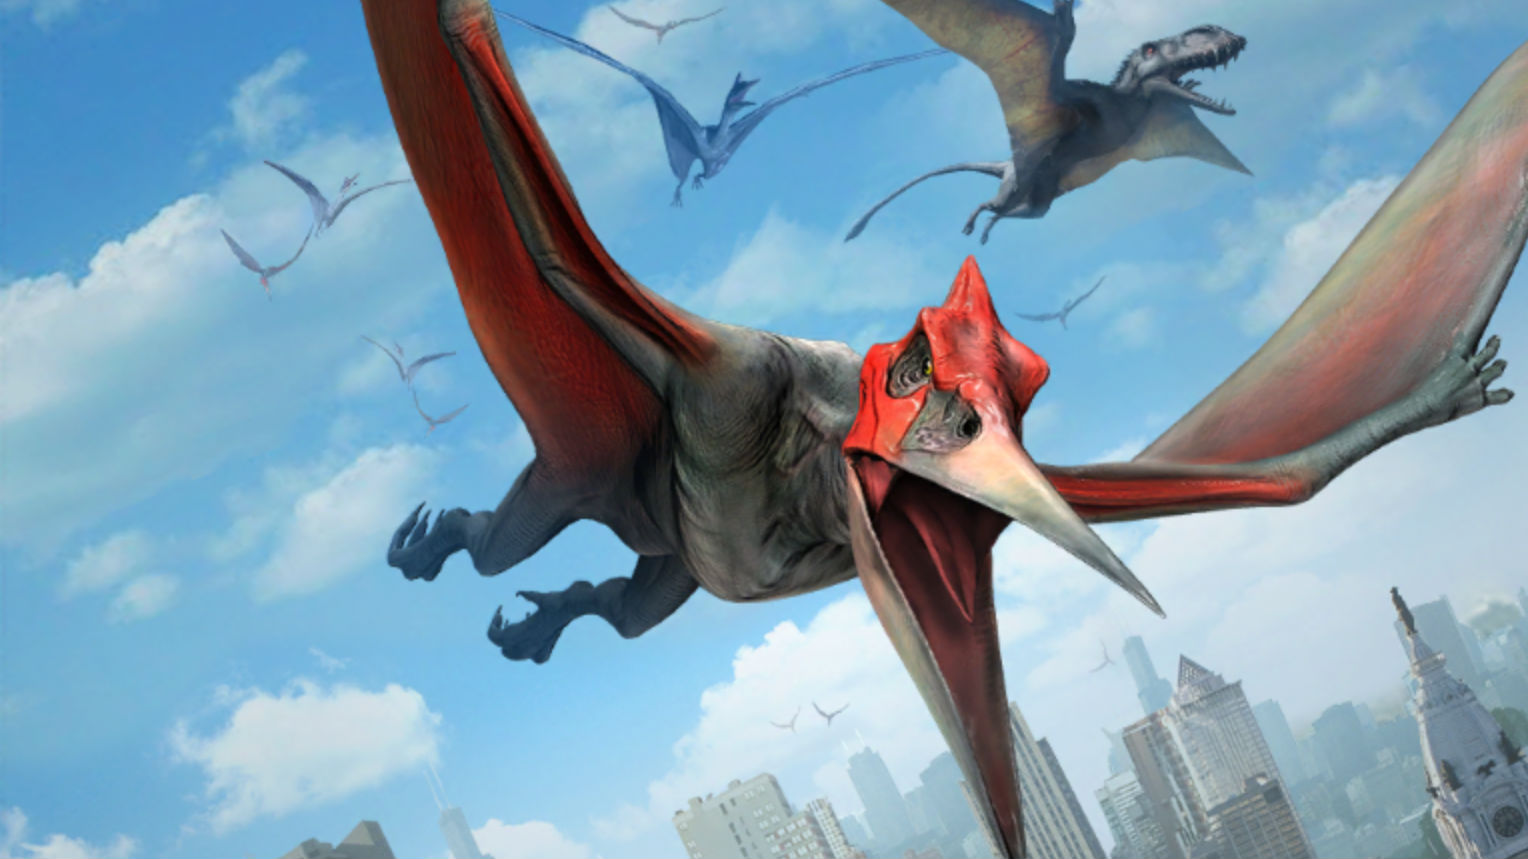 Jurassic World Alive: How to Get Pterosaurs on Your Team